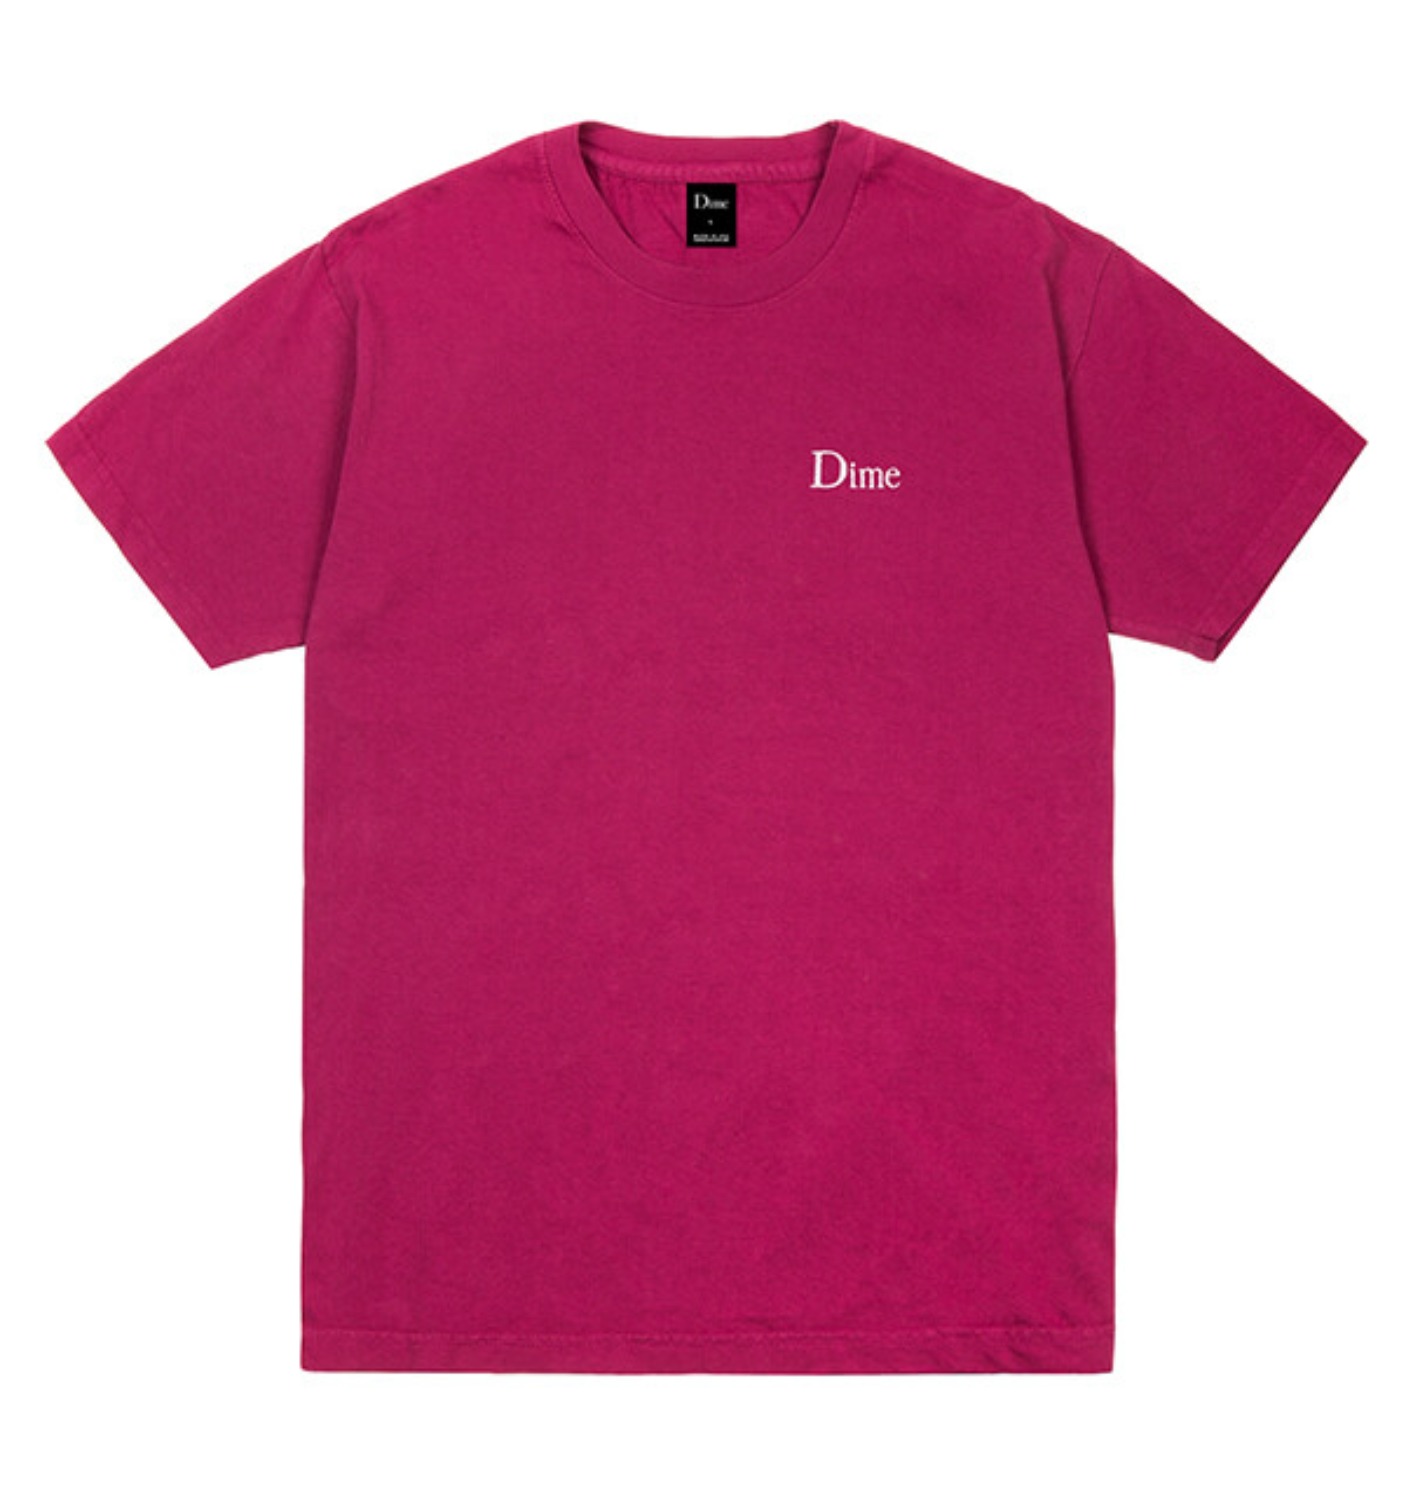 CLASSIC LOGO EMBROIDERED T SHIRT BURGUNDY